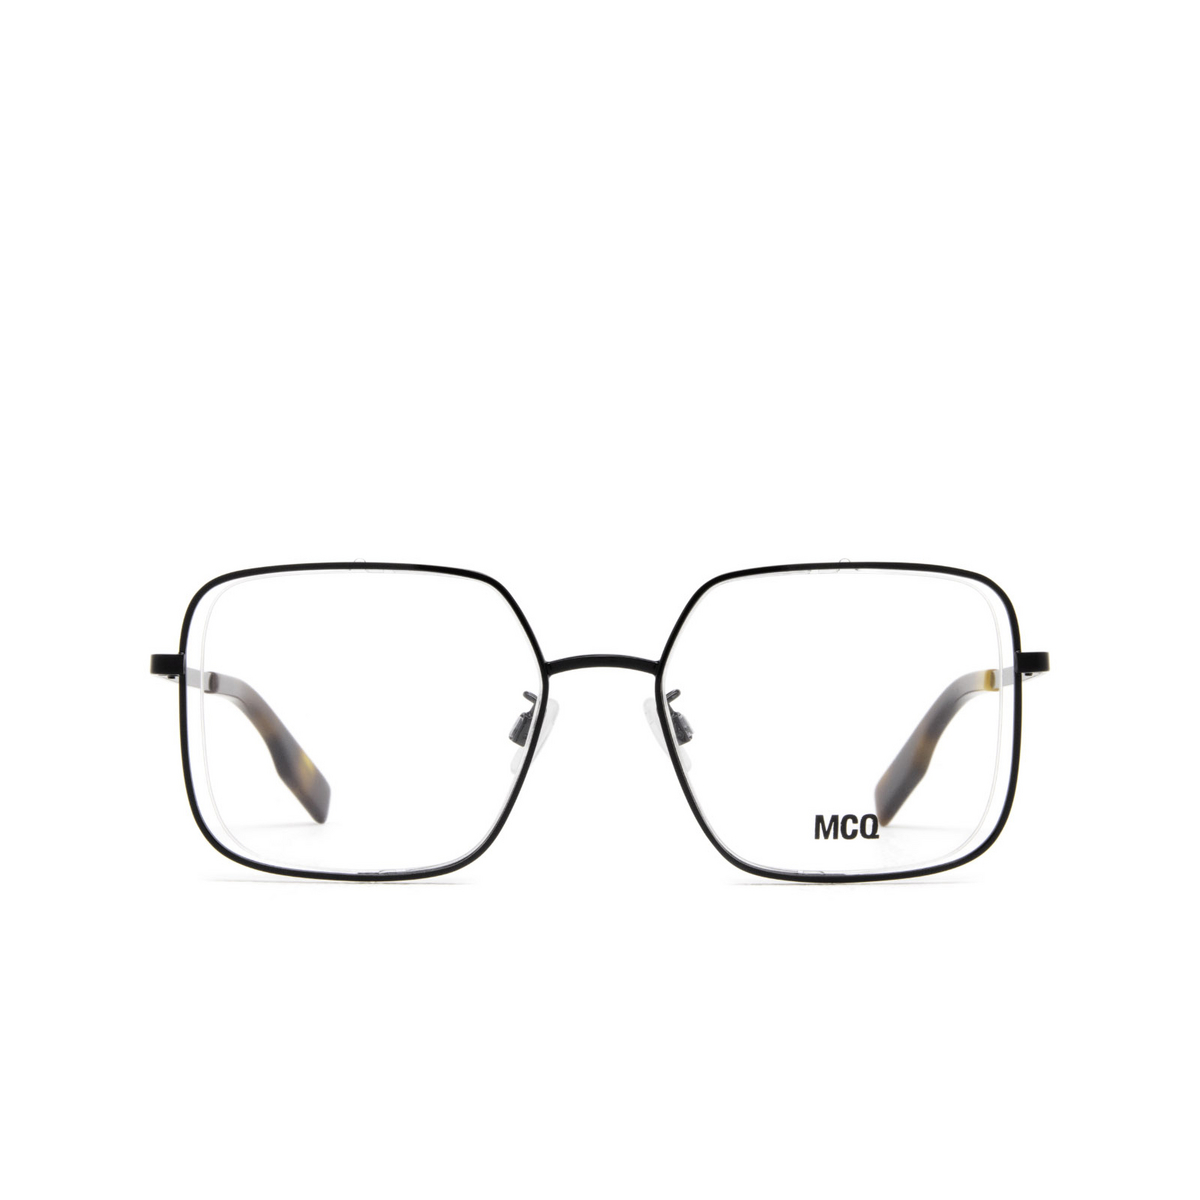 Alexander McQueen® Square Eyeglasses: MQ0318O color 002 Black - front view